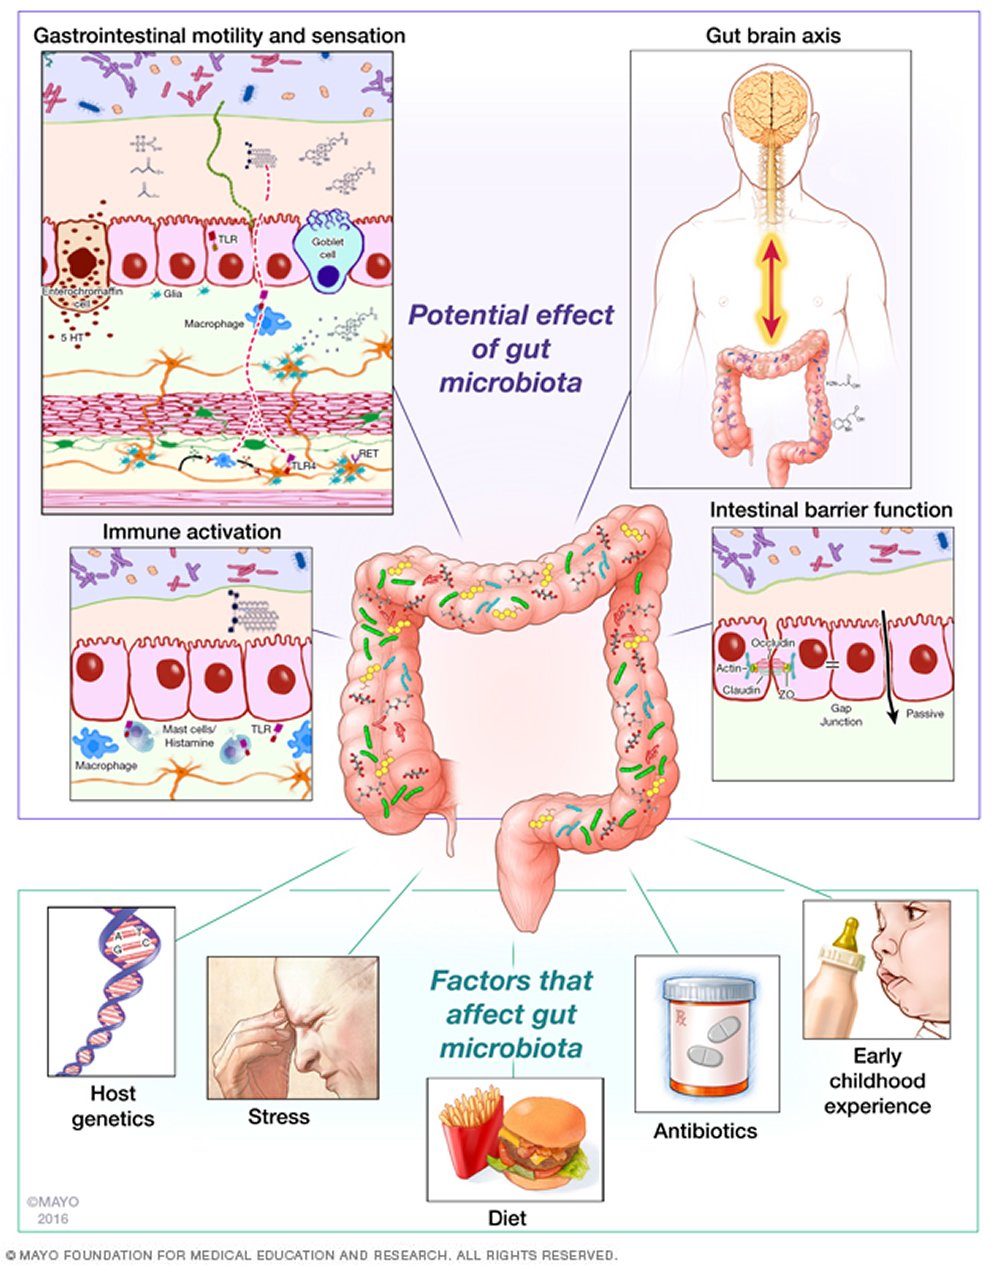 How your Gut Microbiome can cause Obesity, Heart Disease